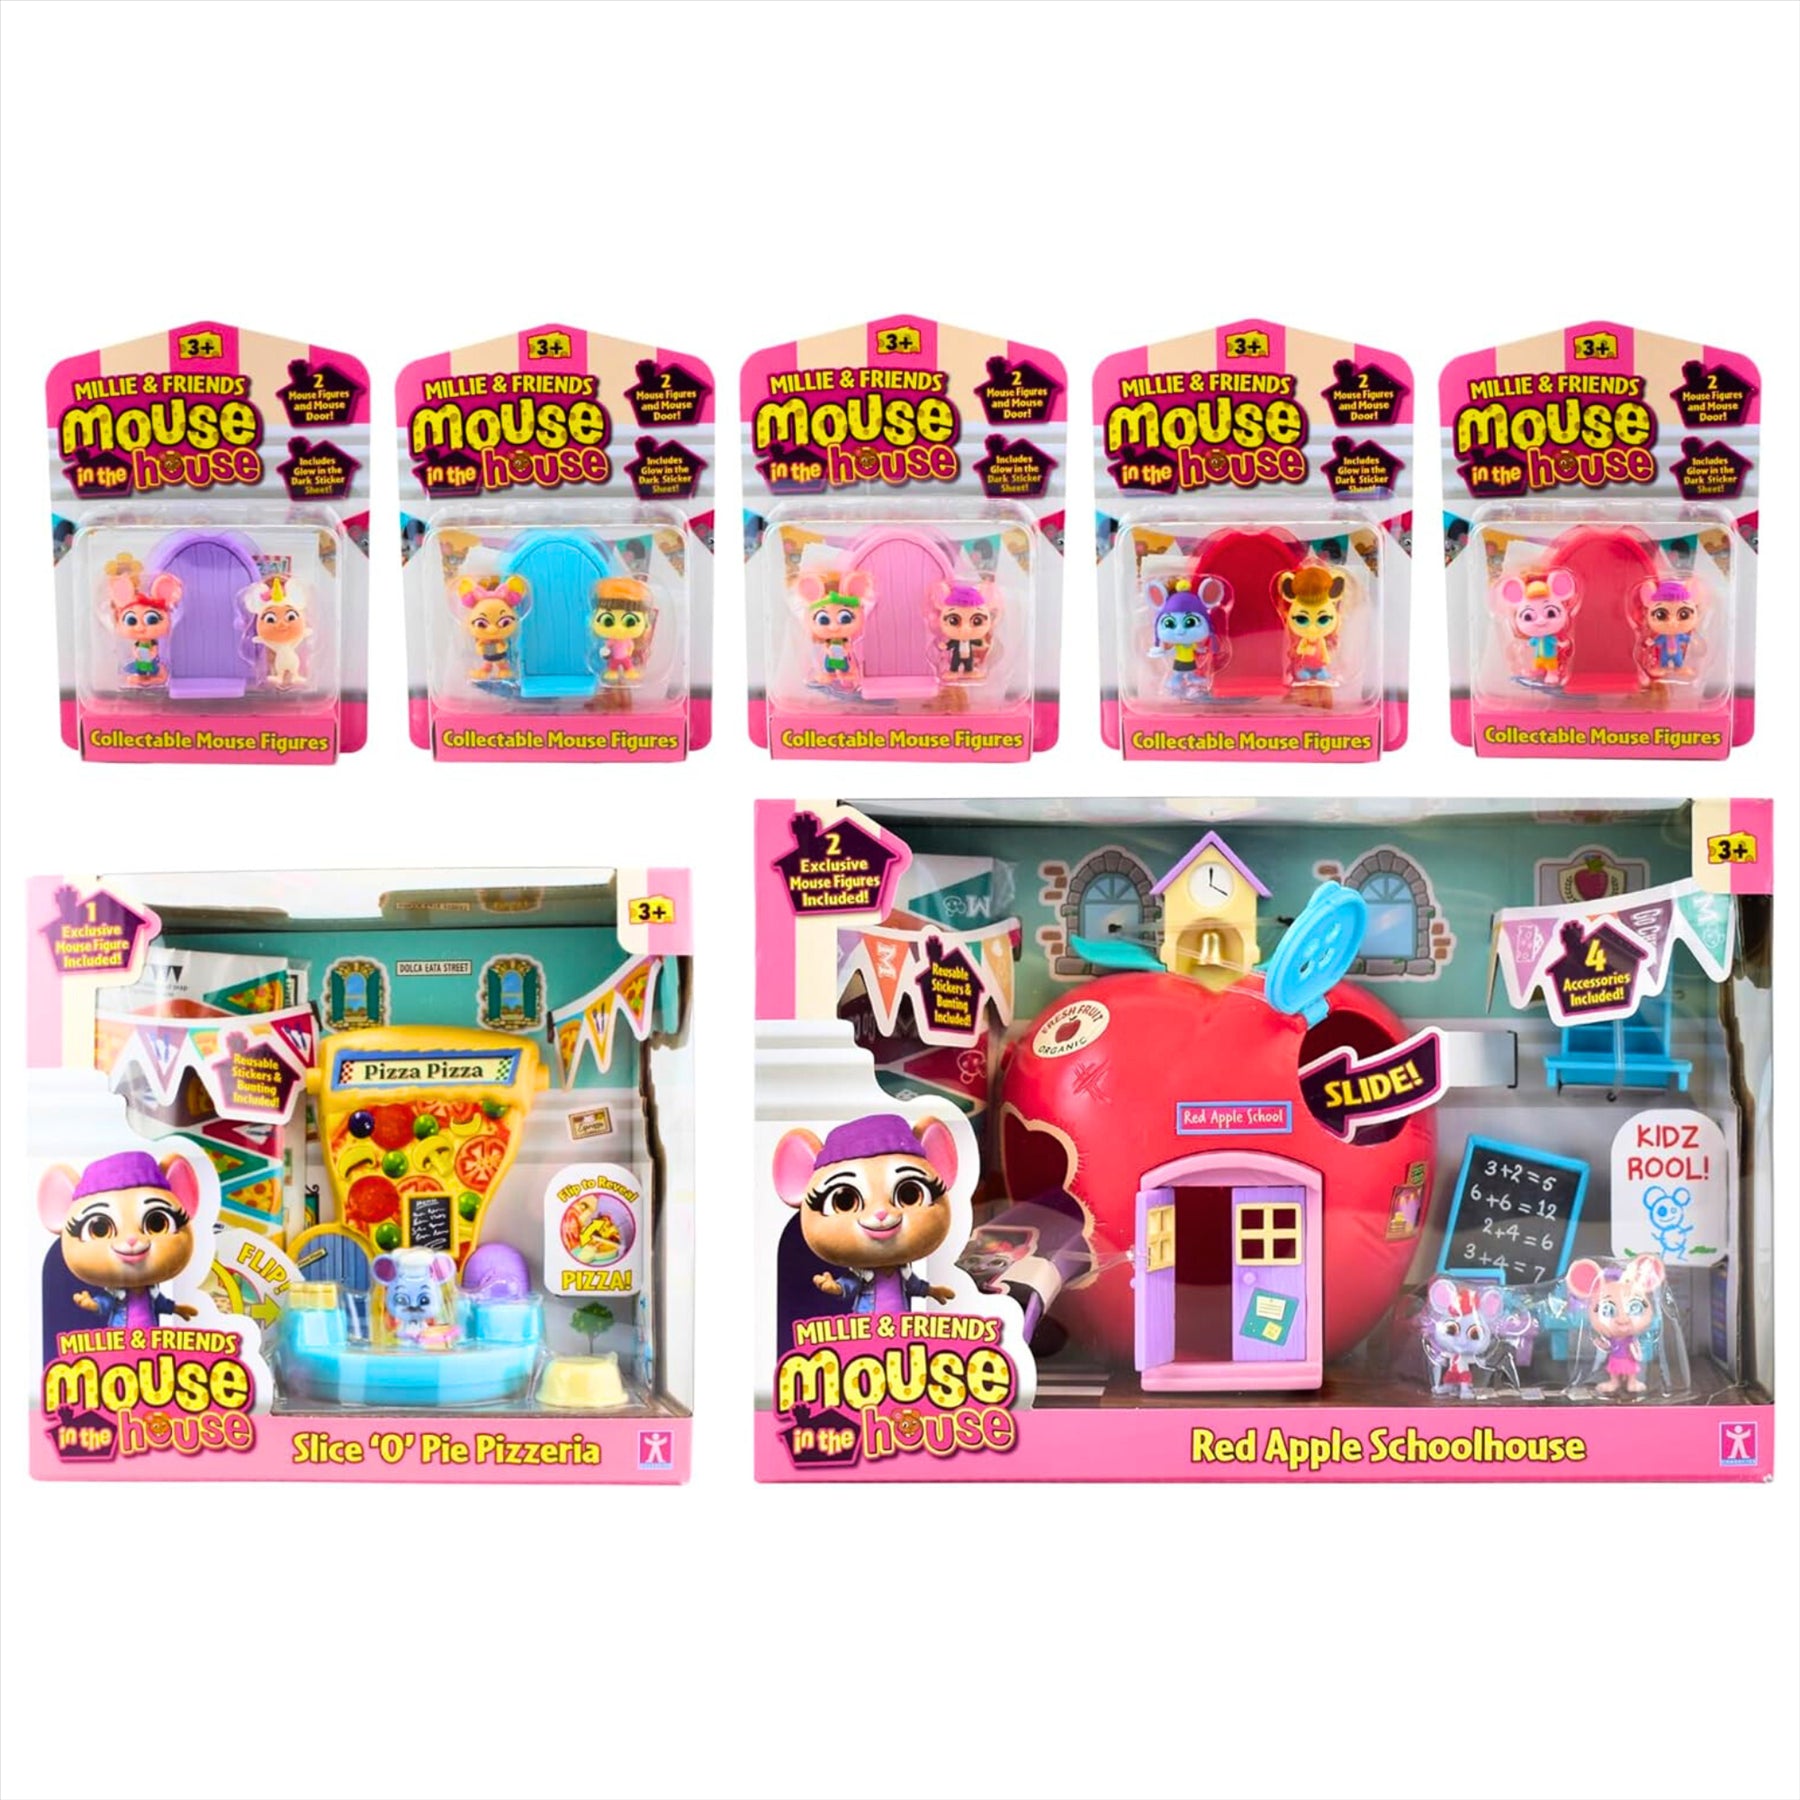 Millie and Friends Mouse in the House Mega Bundle - Red Apple School Playset, Slice 'O' Pie Pizzeria Playset, and 5x Collectable Mouse Figure Packs